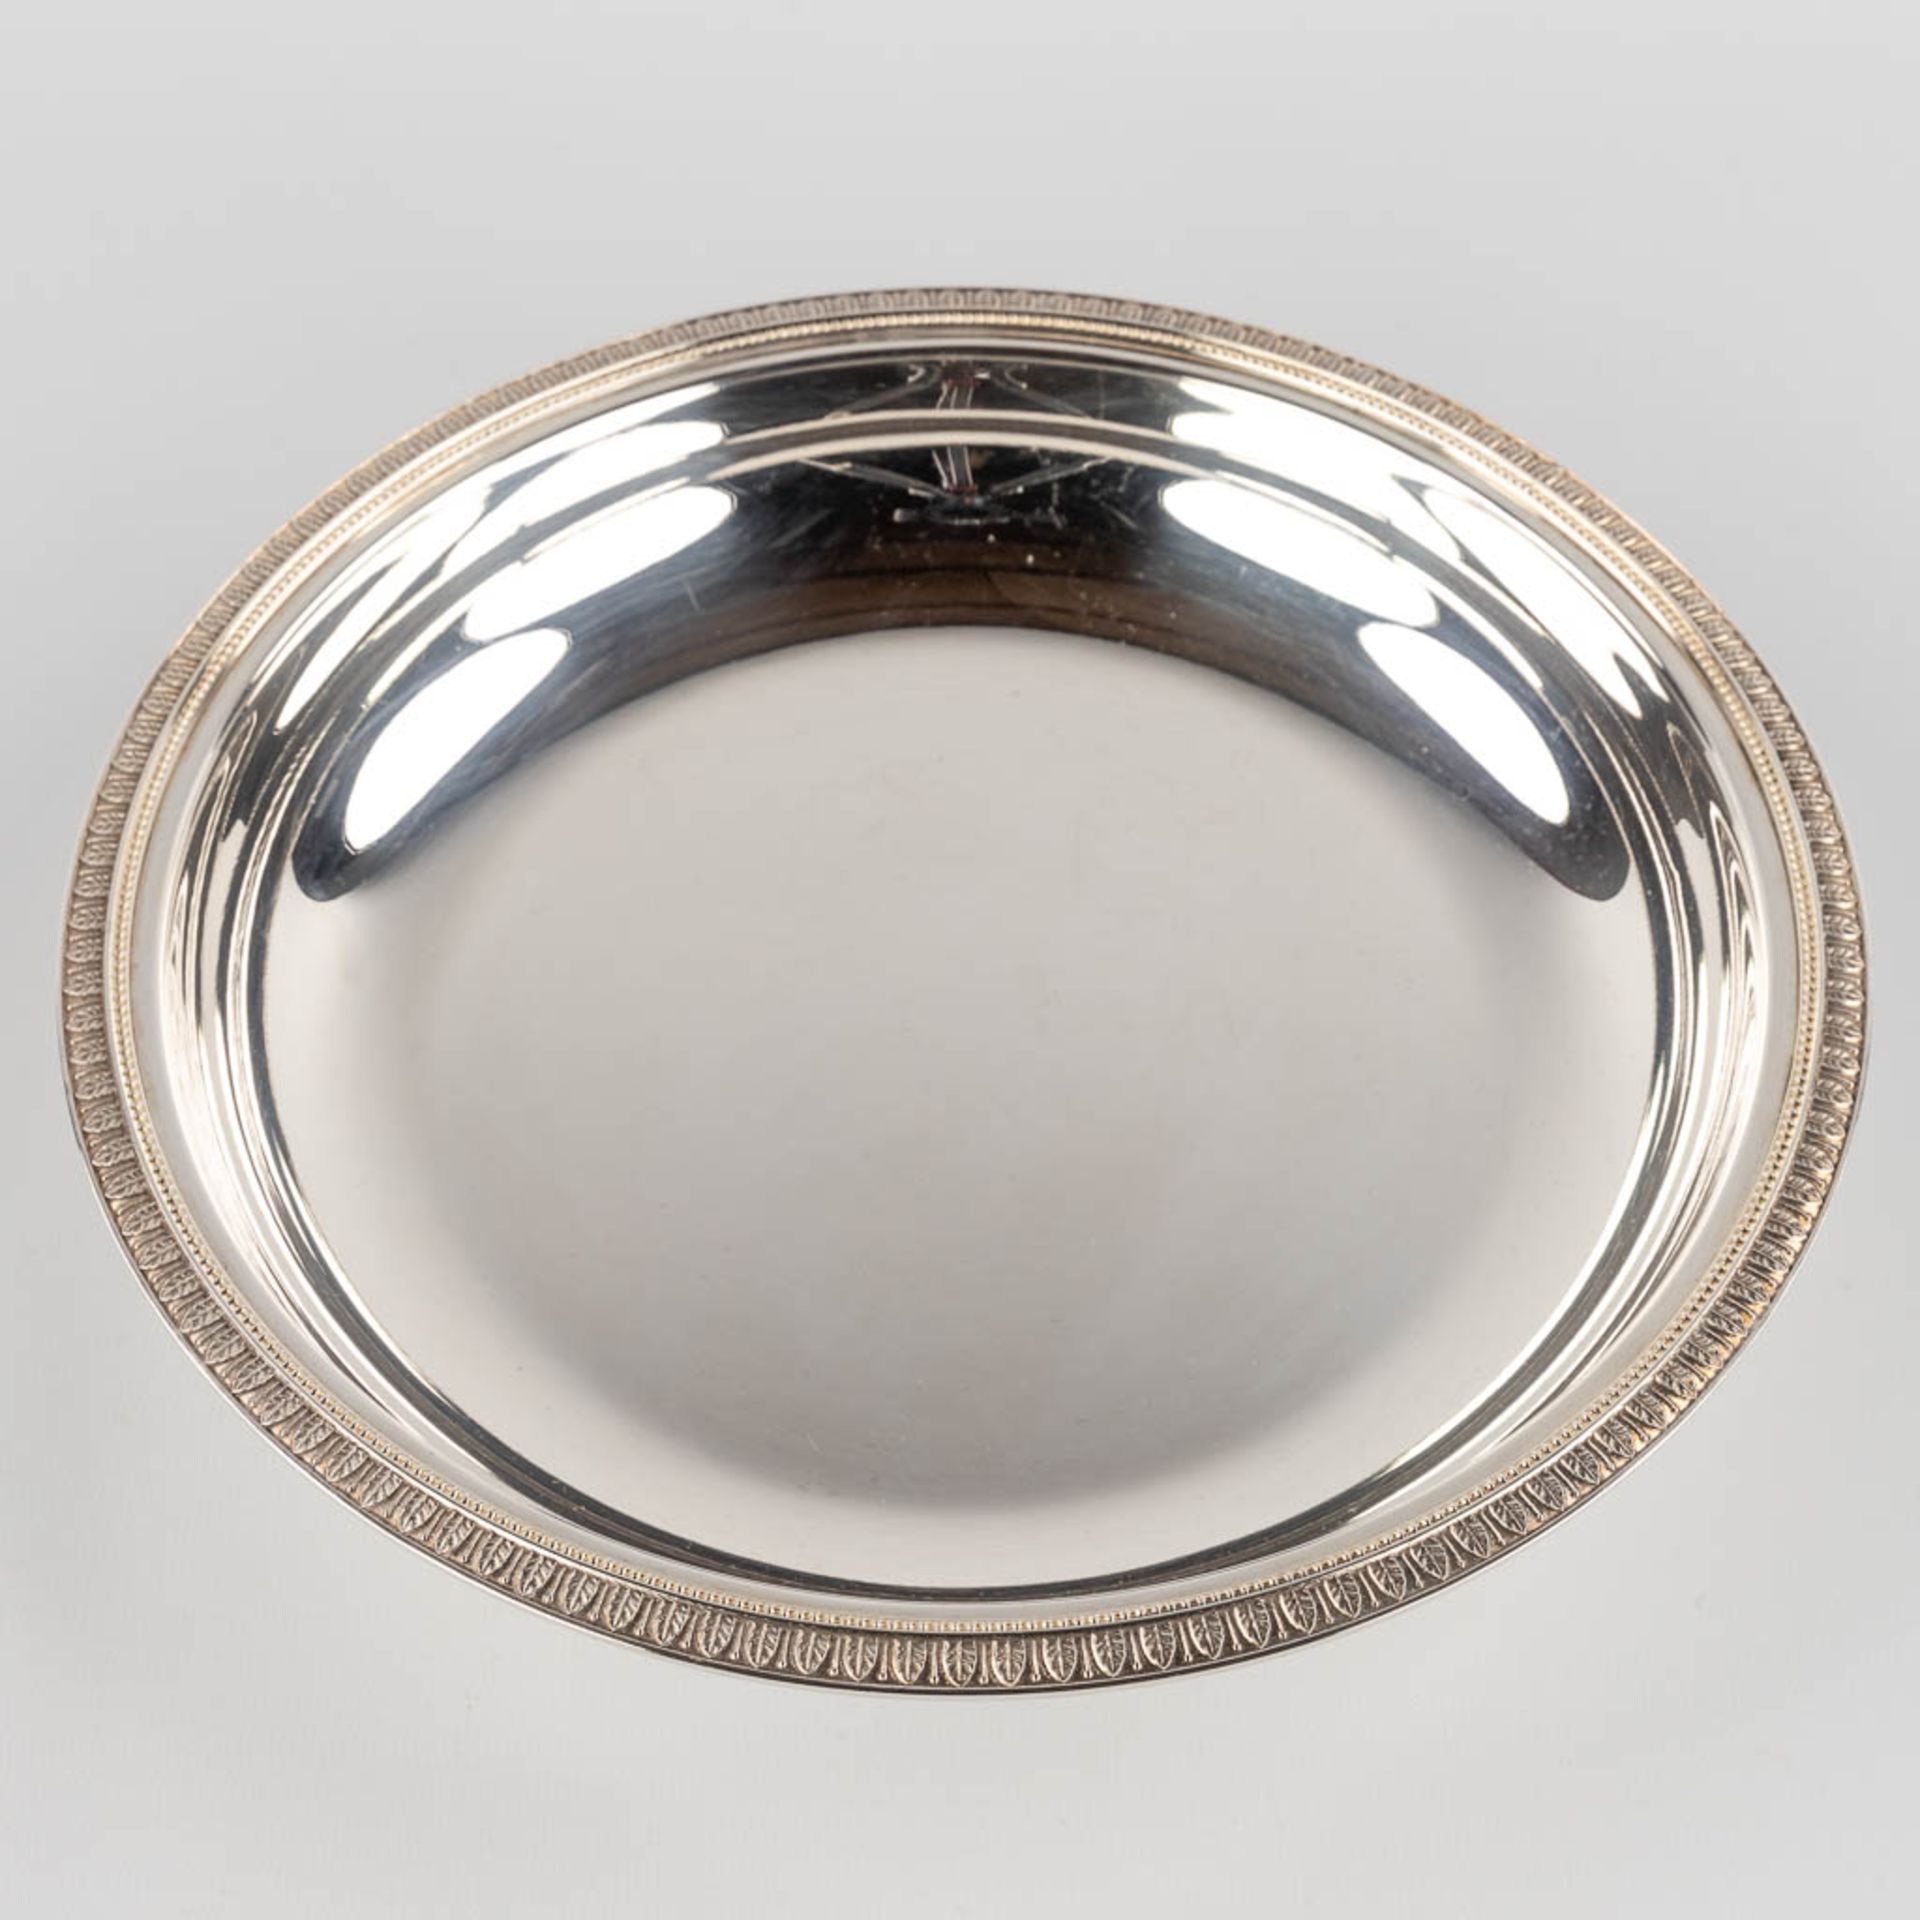 Christofle France, three pieces of silver plated serving accessories. (D:32 x W:45 cm) - Image 6 of 16